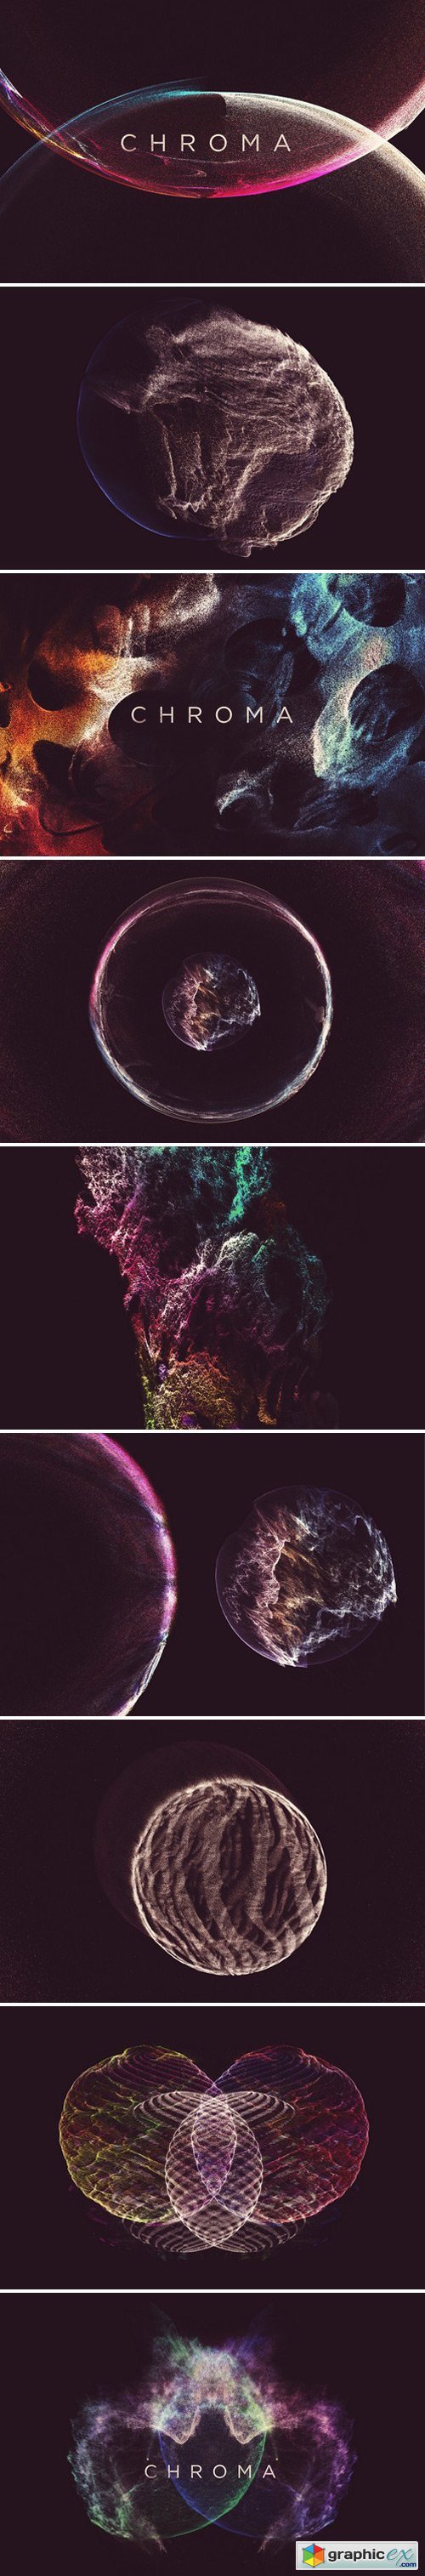 Chroma Abstract Textures